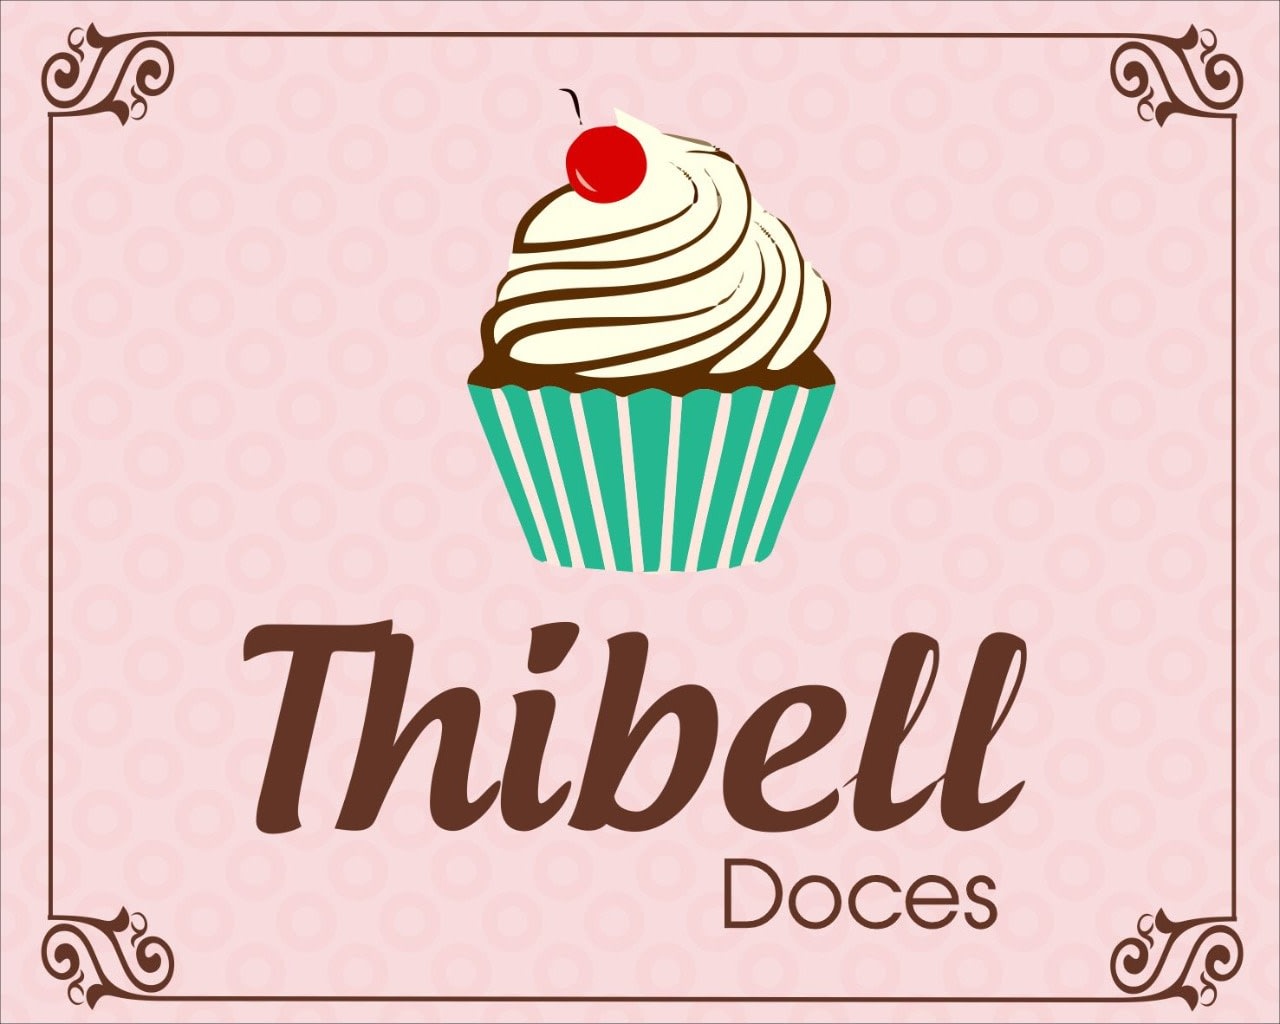 Thibell Doces